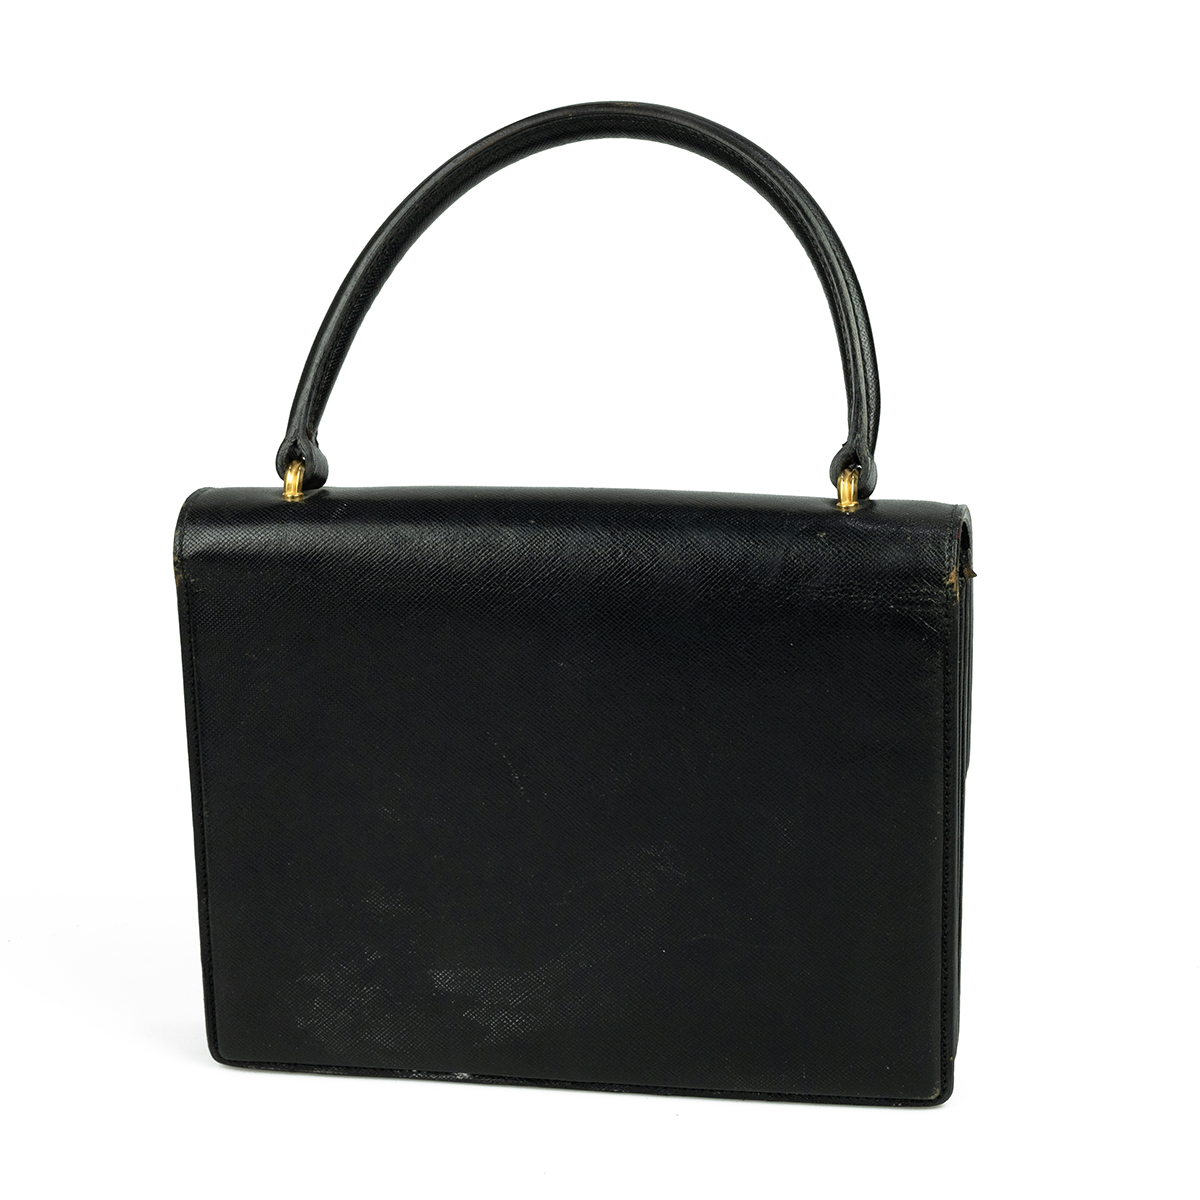 Circa 1980s vintage Gucci black leather handbag, with gold-tone hardware, single handle, leather ... - Image 5 of 9